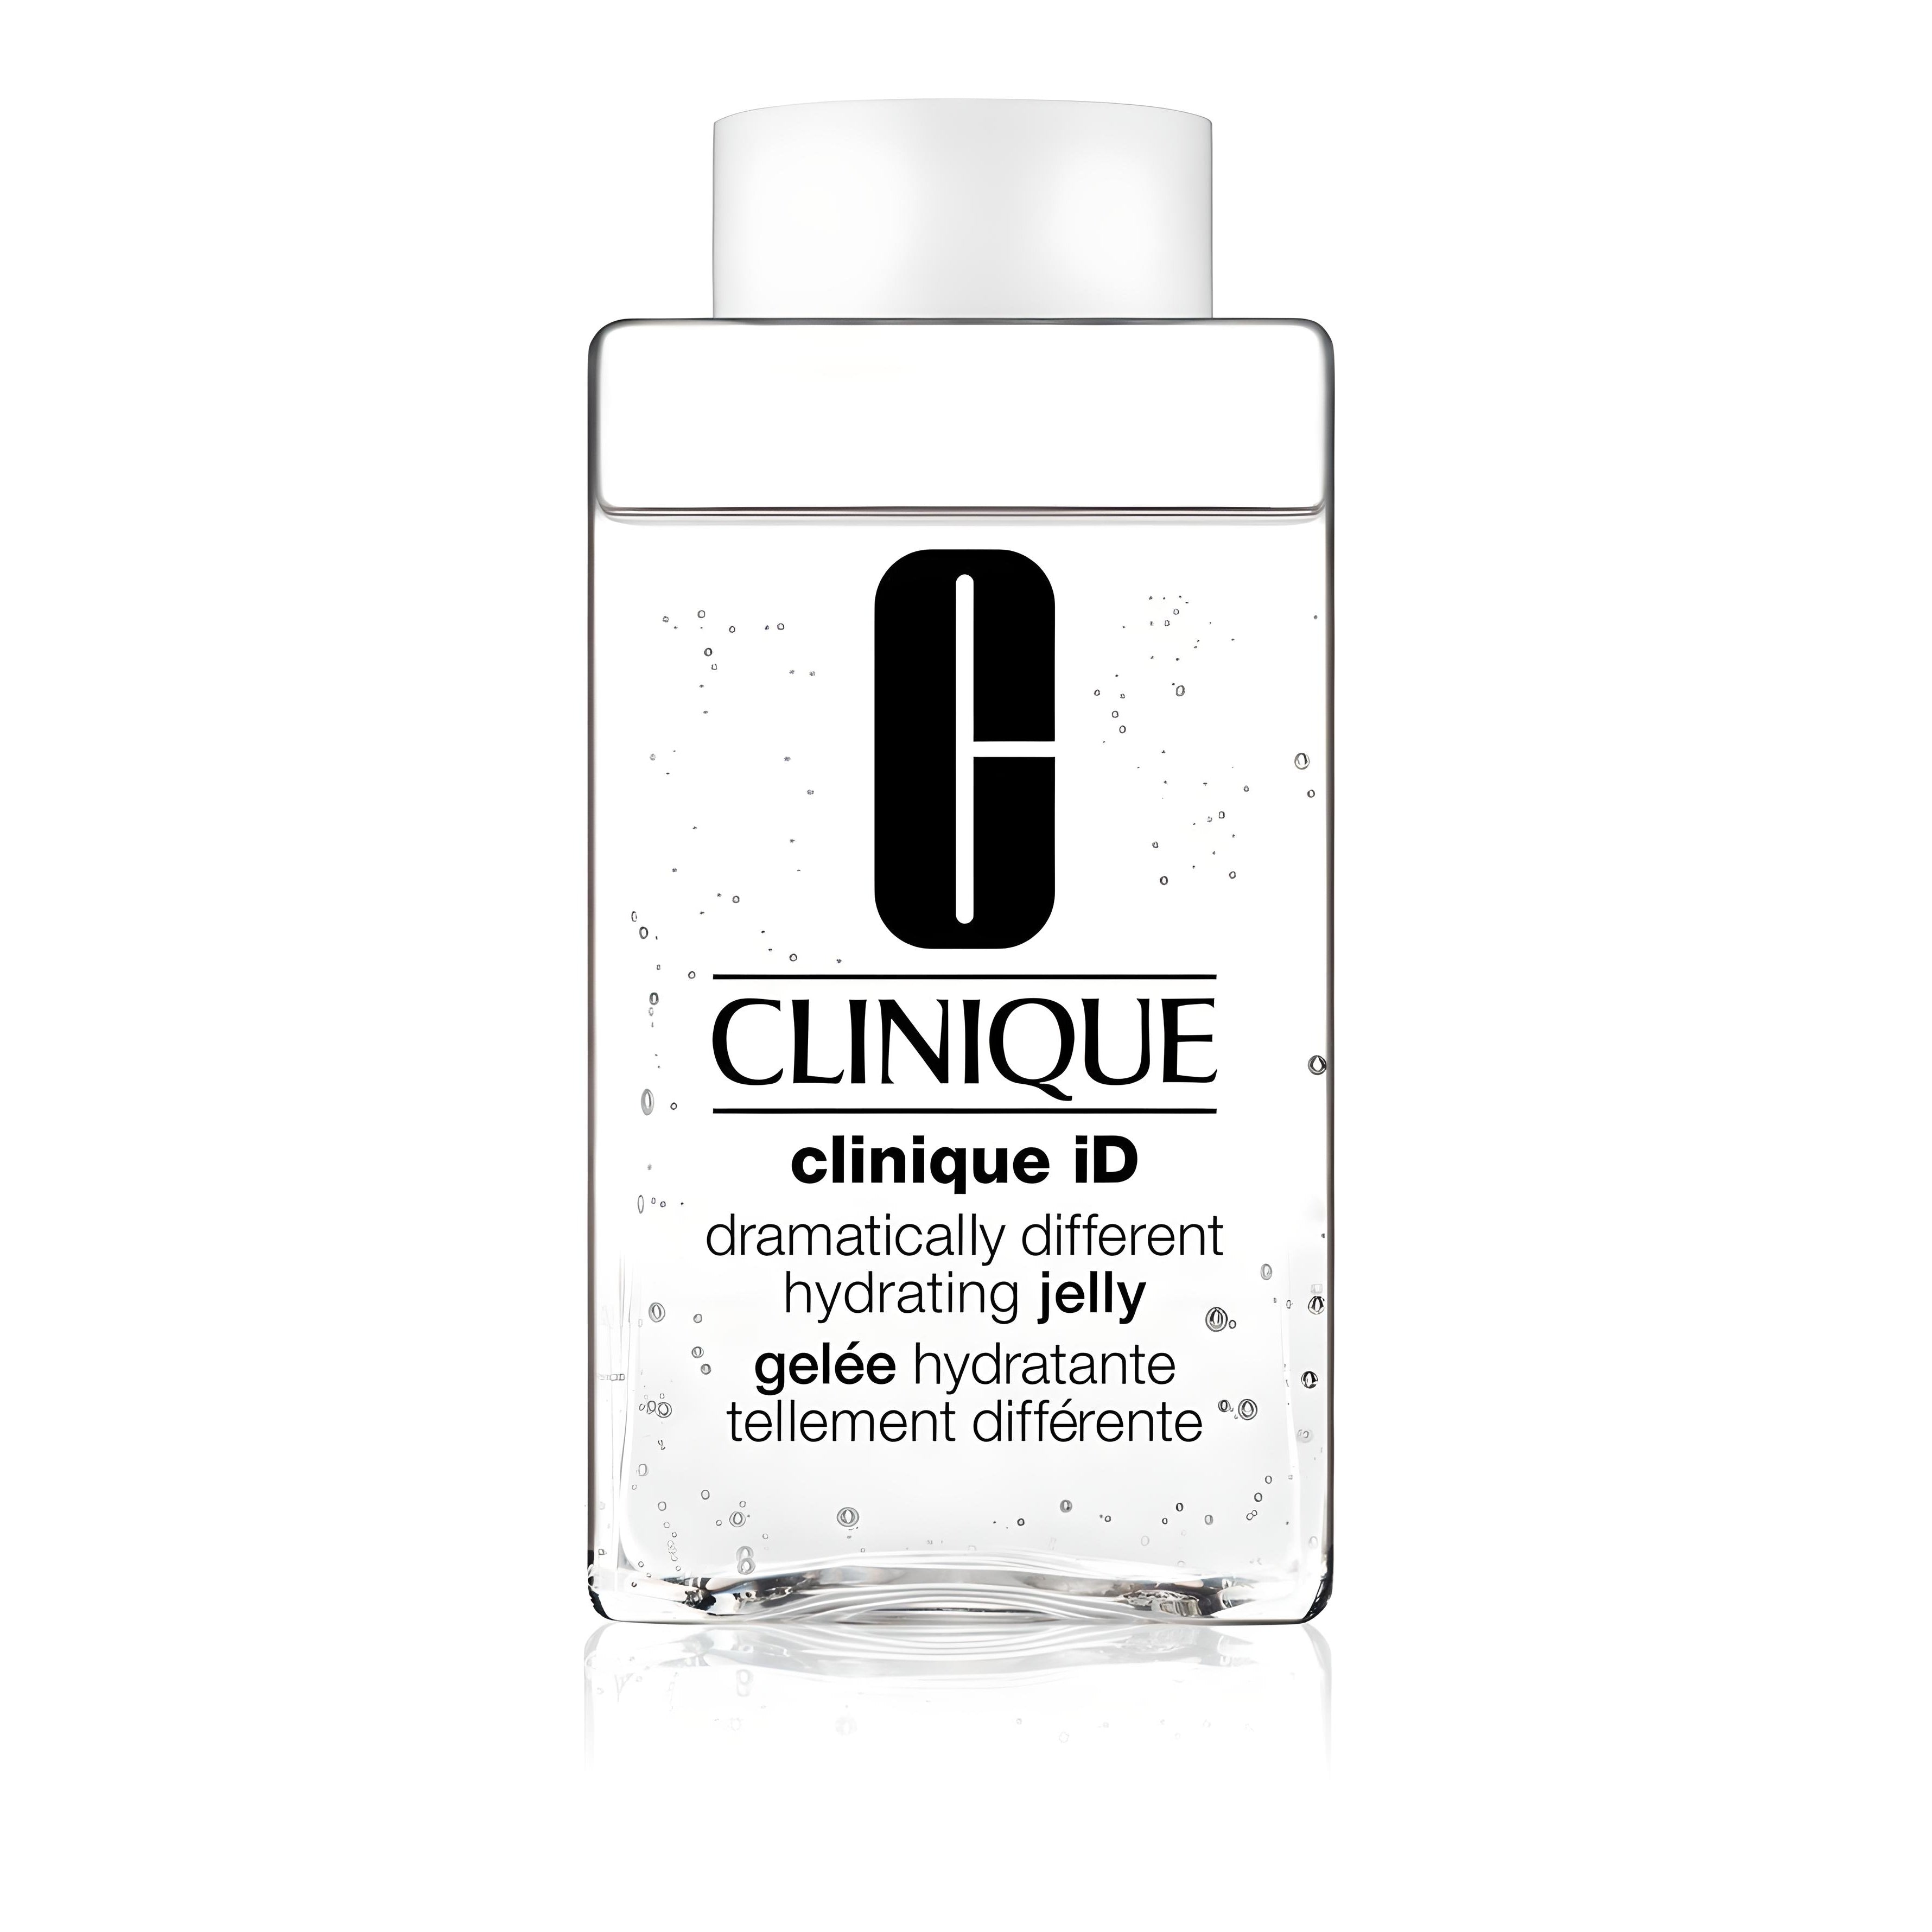 CLINIQUE ID dramatically different hydrating jelly Gesichtspflege CLINIQUE   